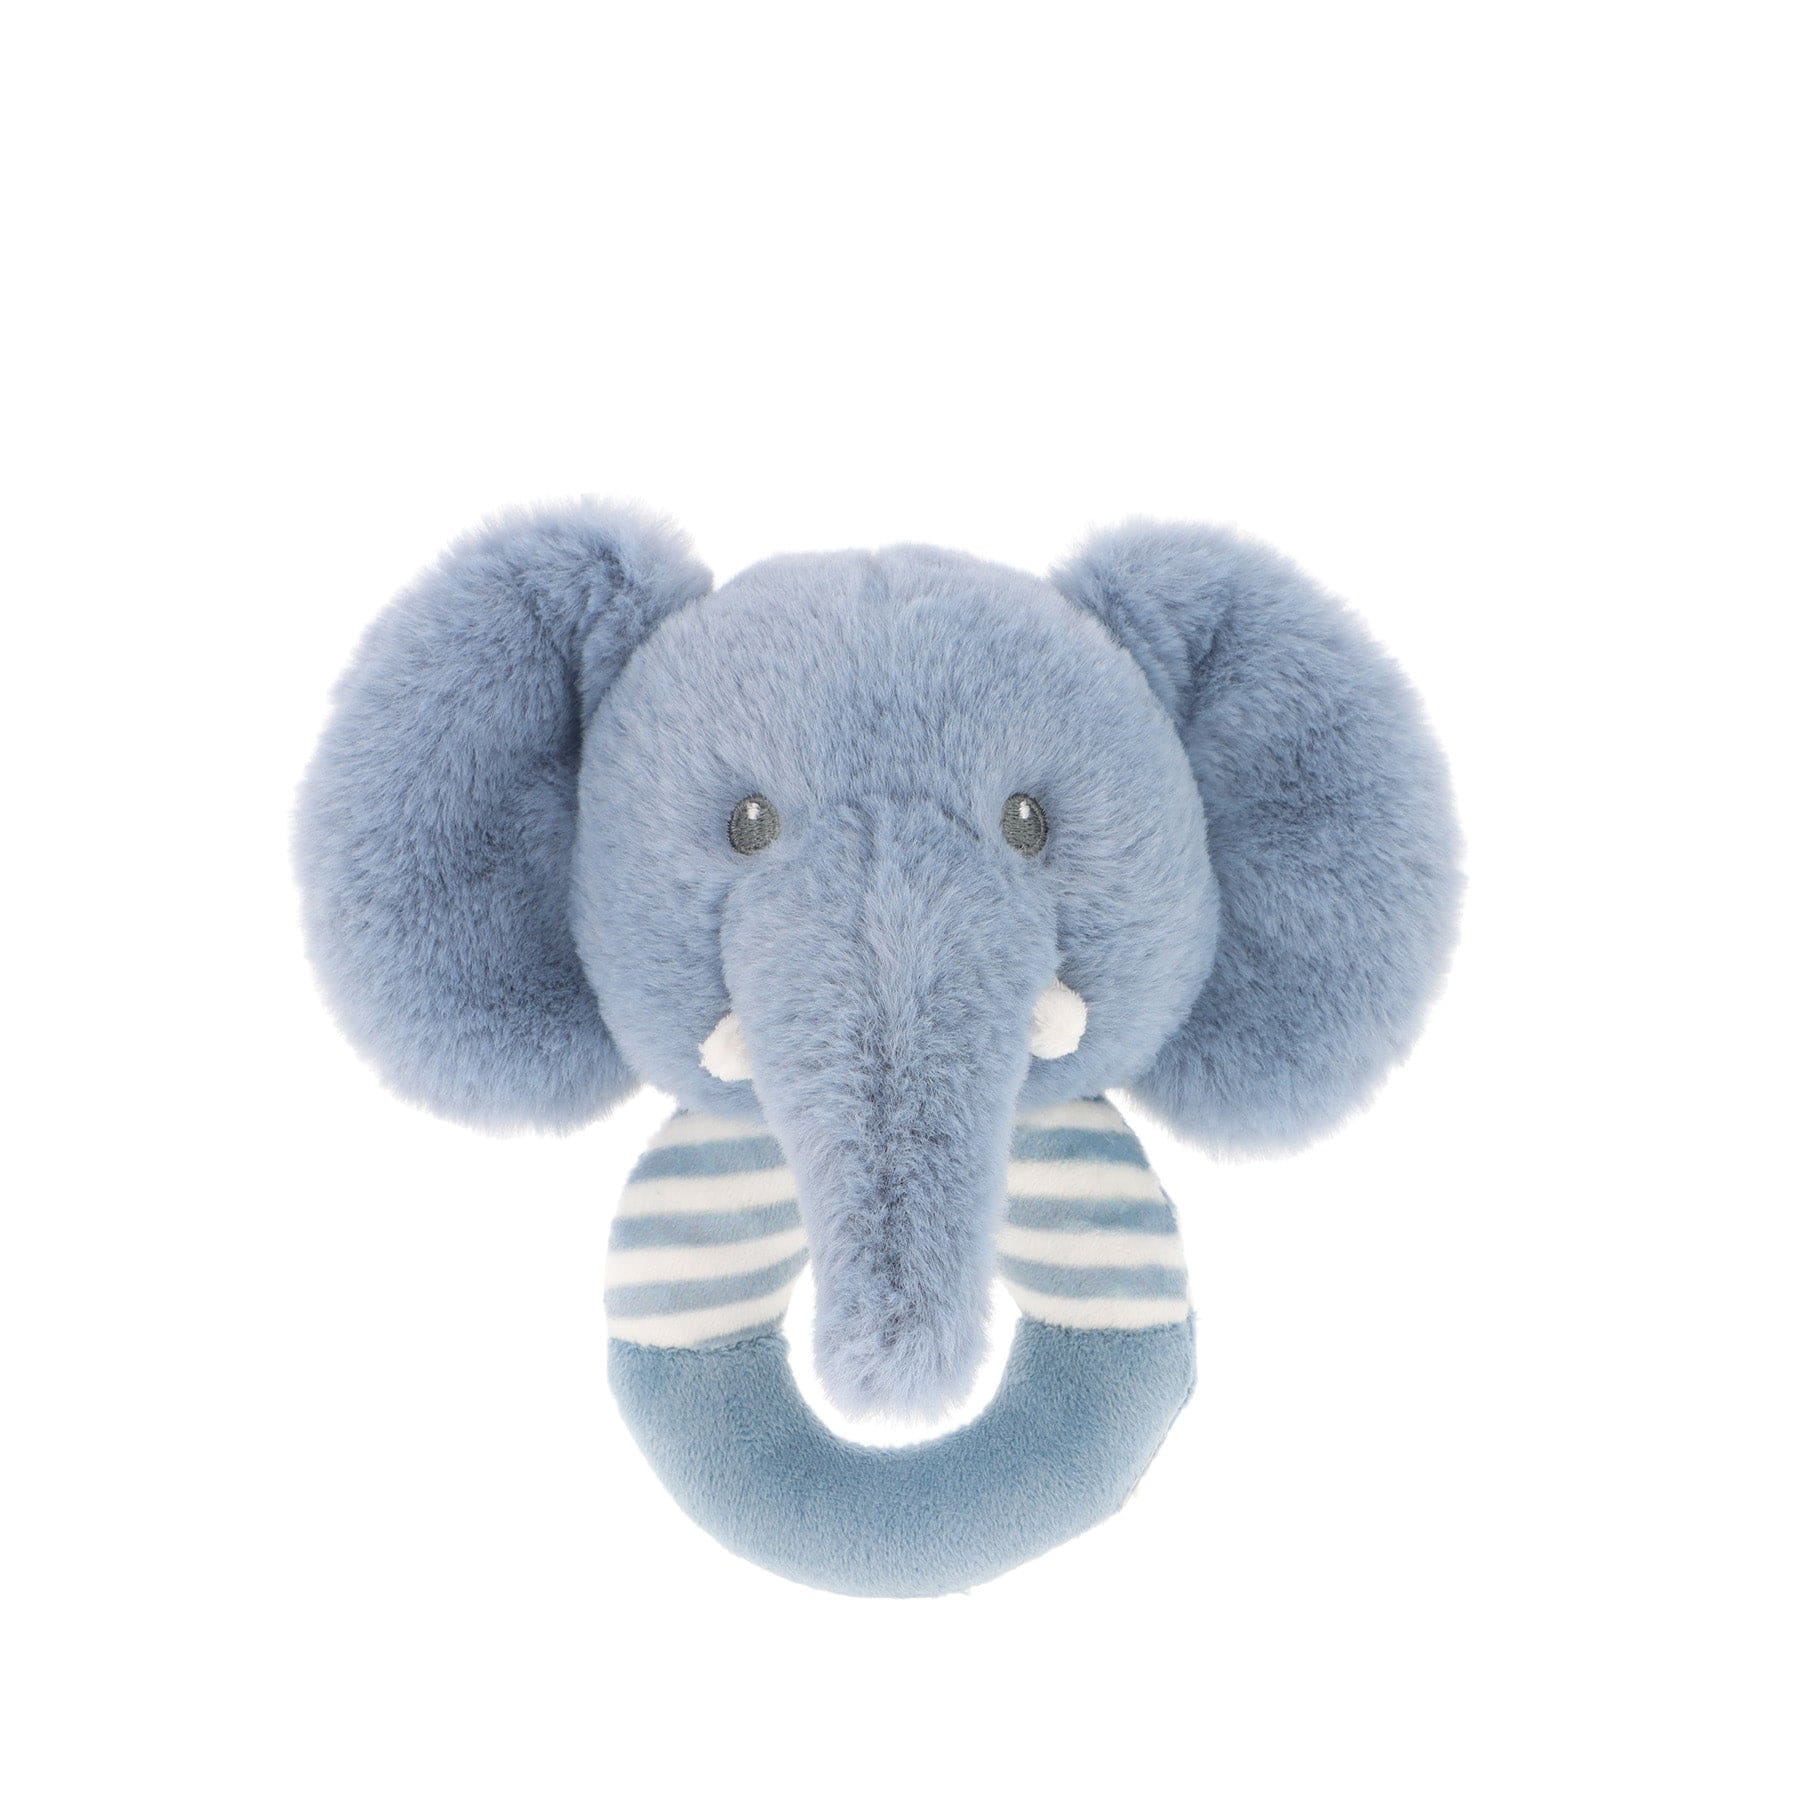 Blue plush elephant toy with striped ears and ring hanging loop on white background.